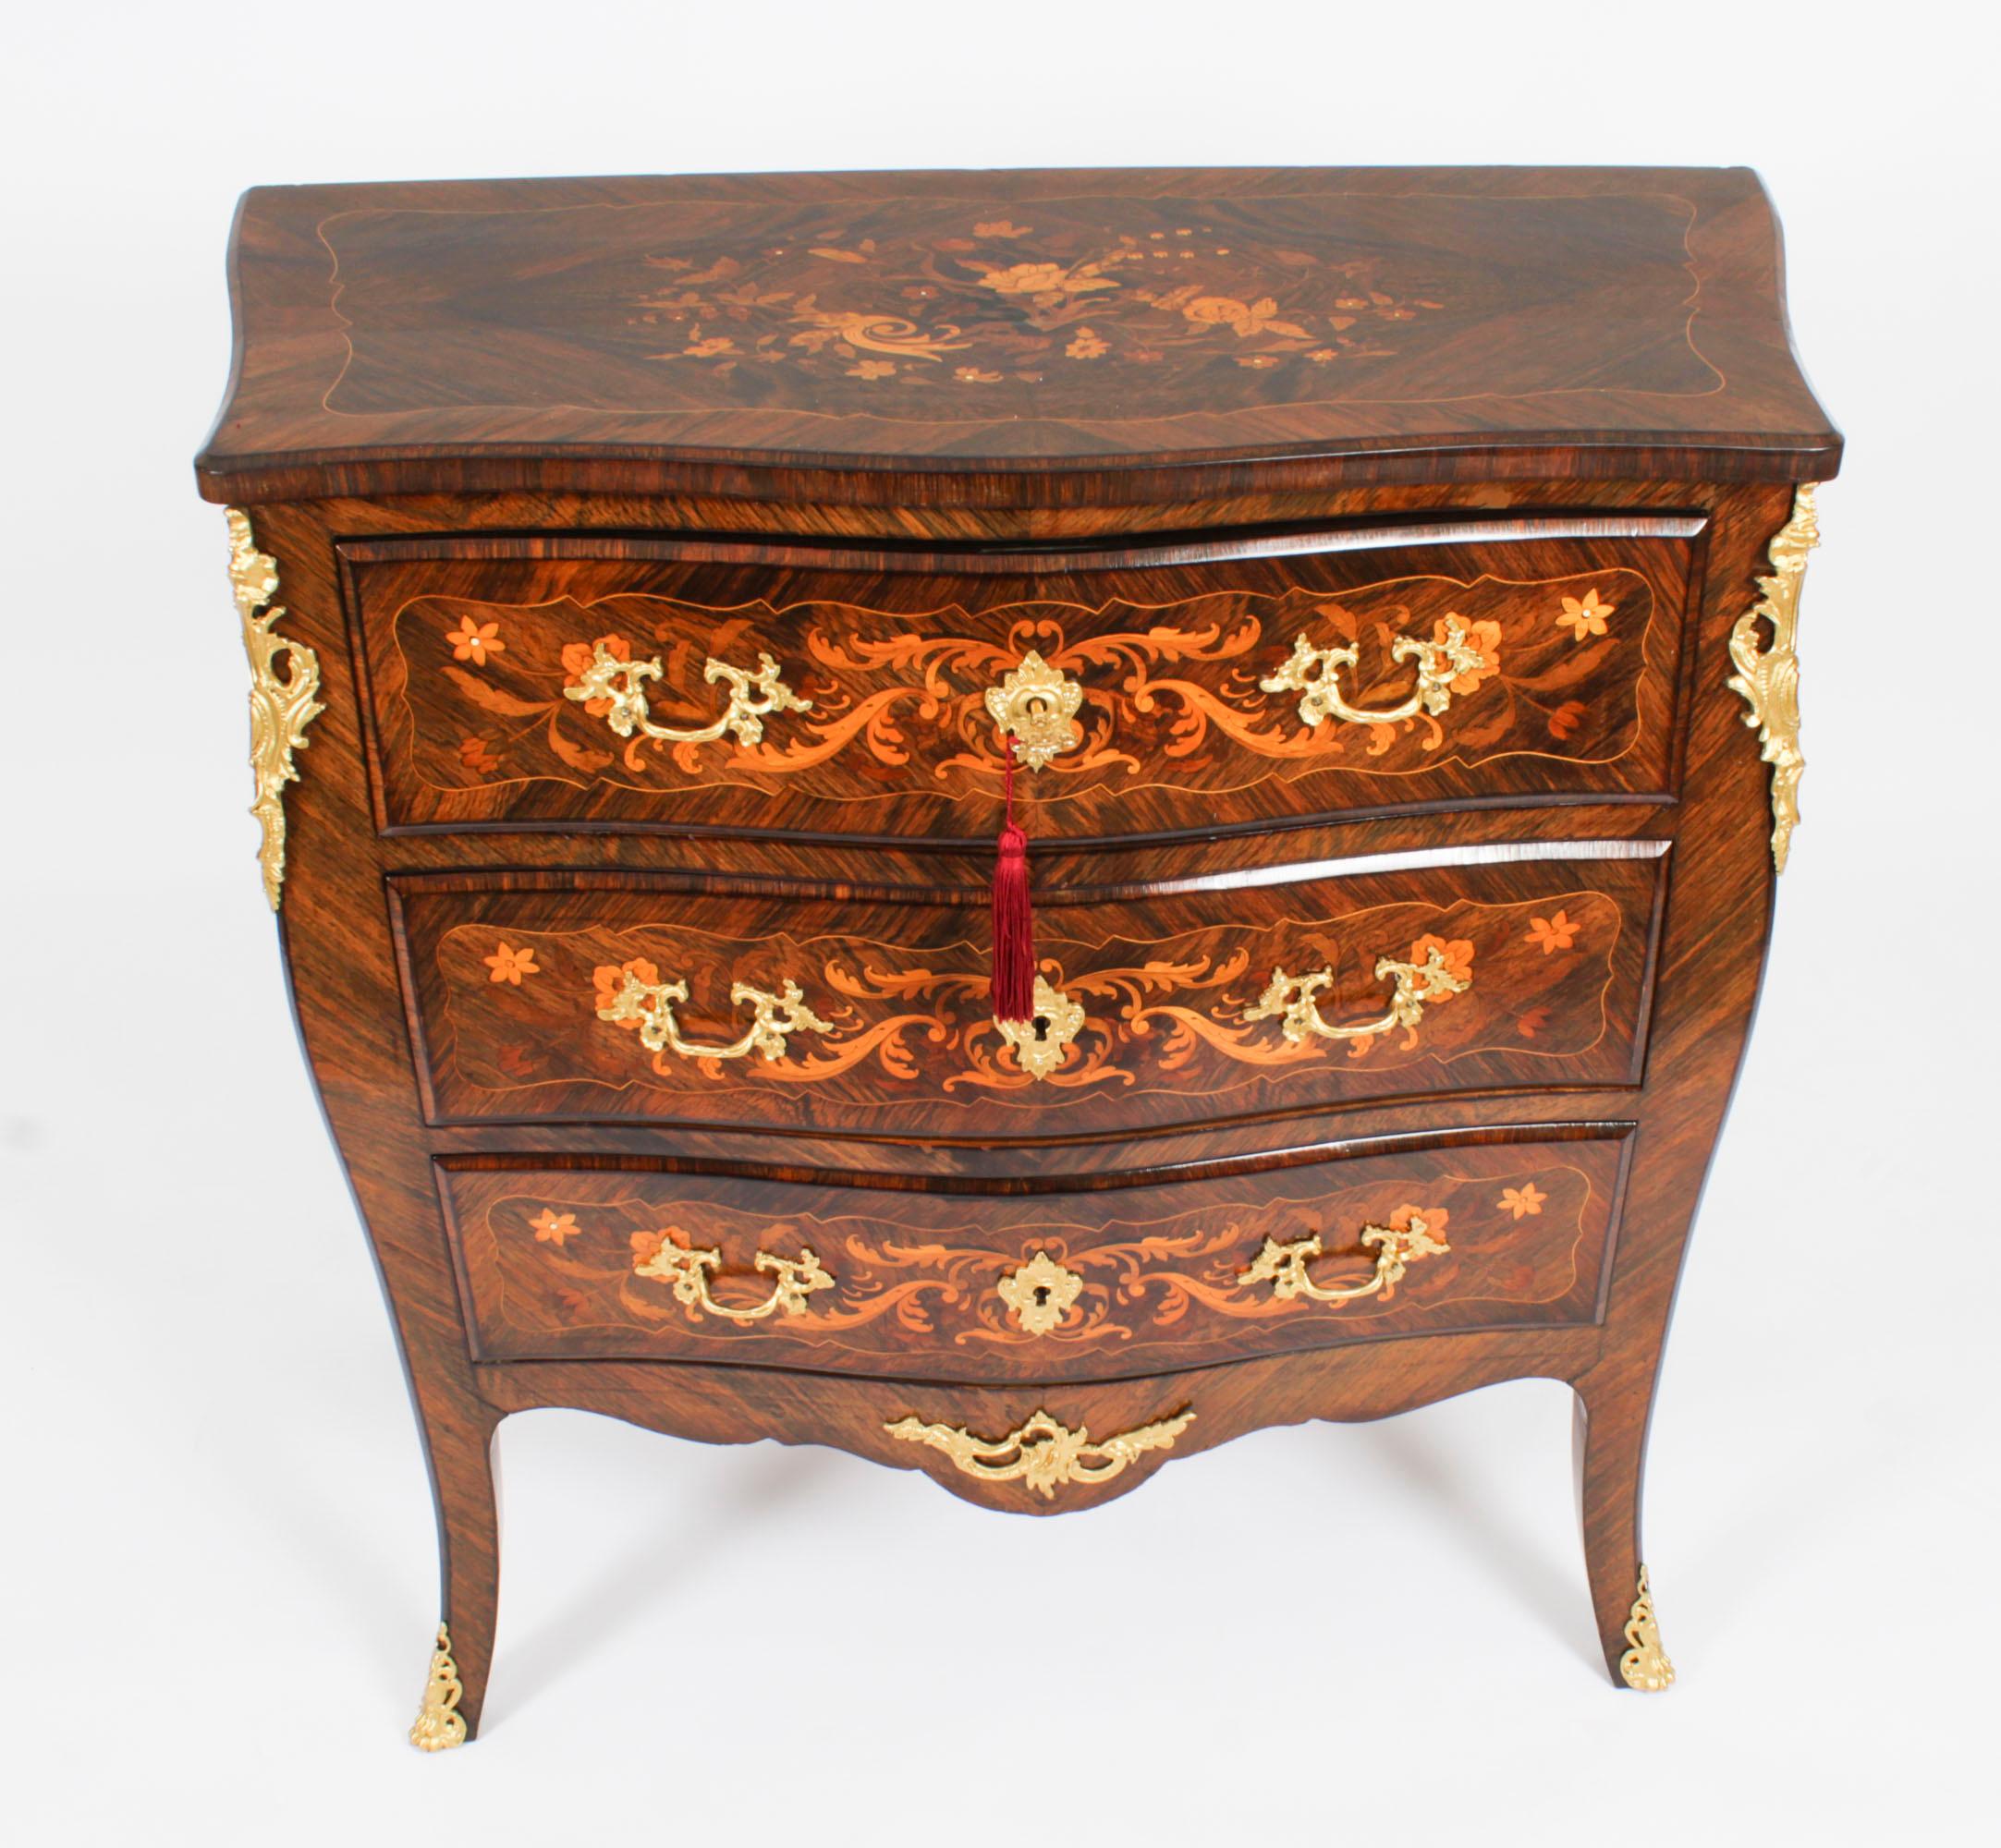 This is a stunning antique French Louis Revival marquetry and ormolu mounted wood serpentine commode, circa 1880 in date.
 
The serpentine top with a moulded edge over three long drawers and a shaped apron, on tapered slightly outswept legs, with